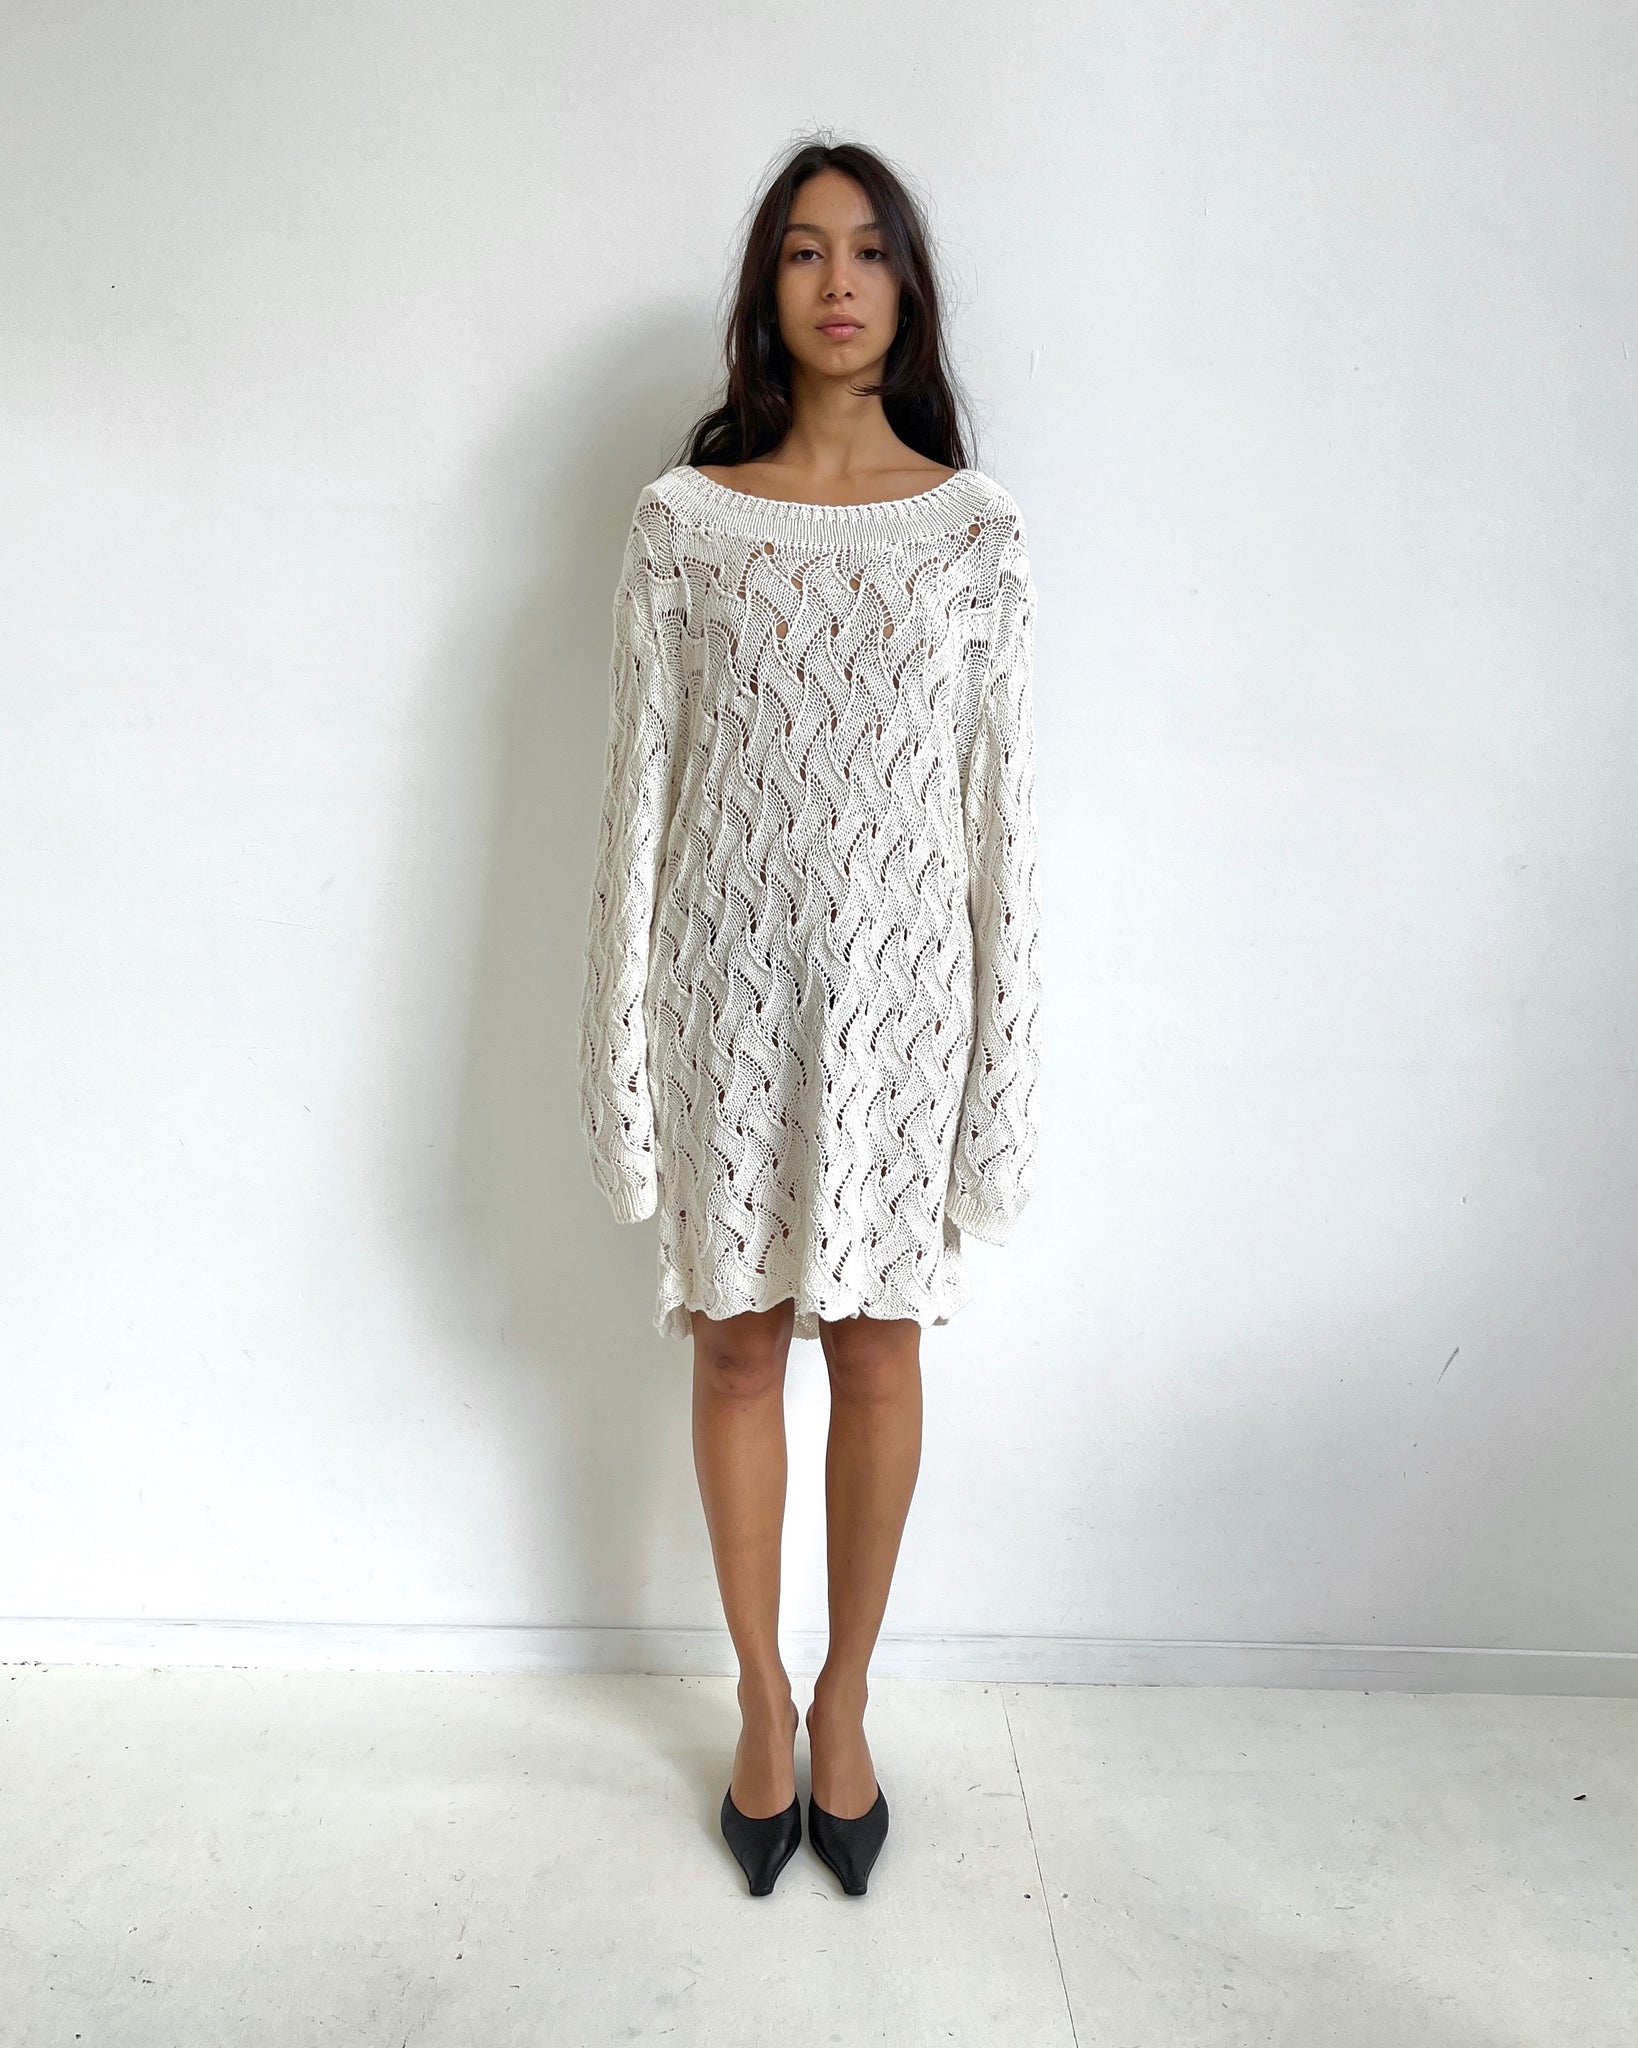 Knitted Dress